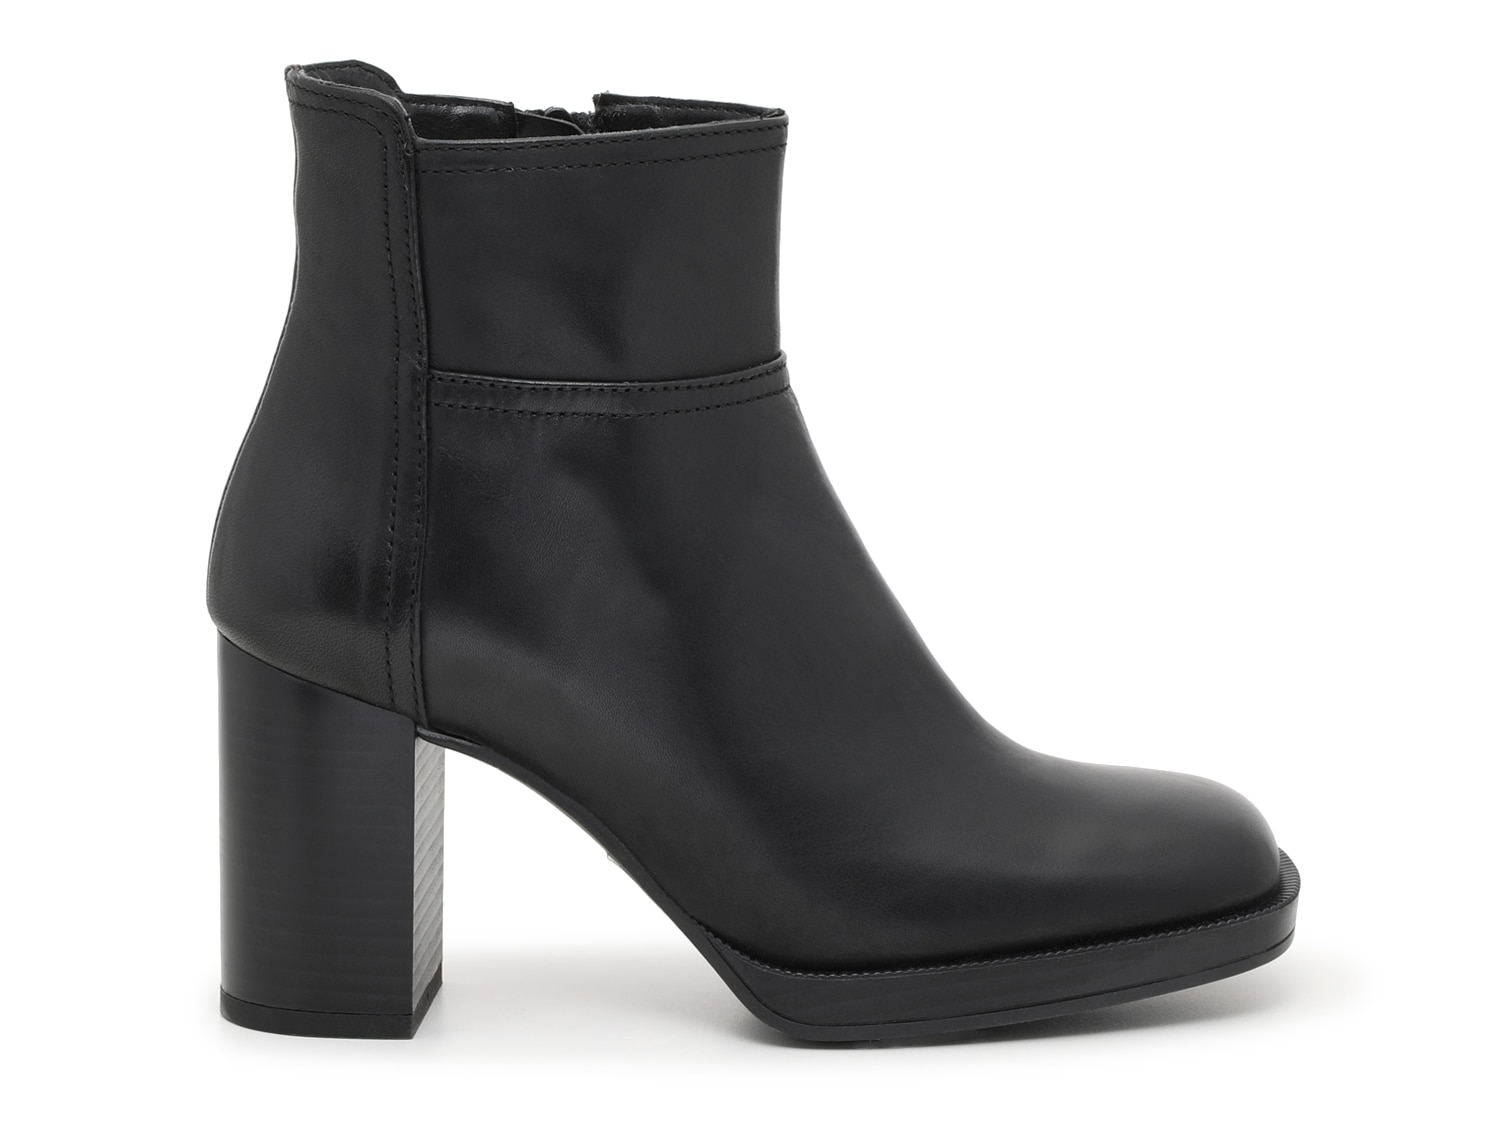 Coach and Four Claudia Bootie - Free Shipping | DSW